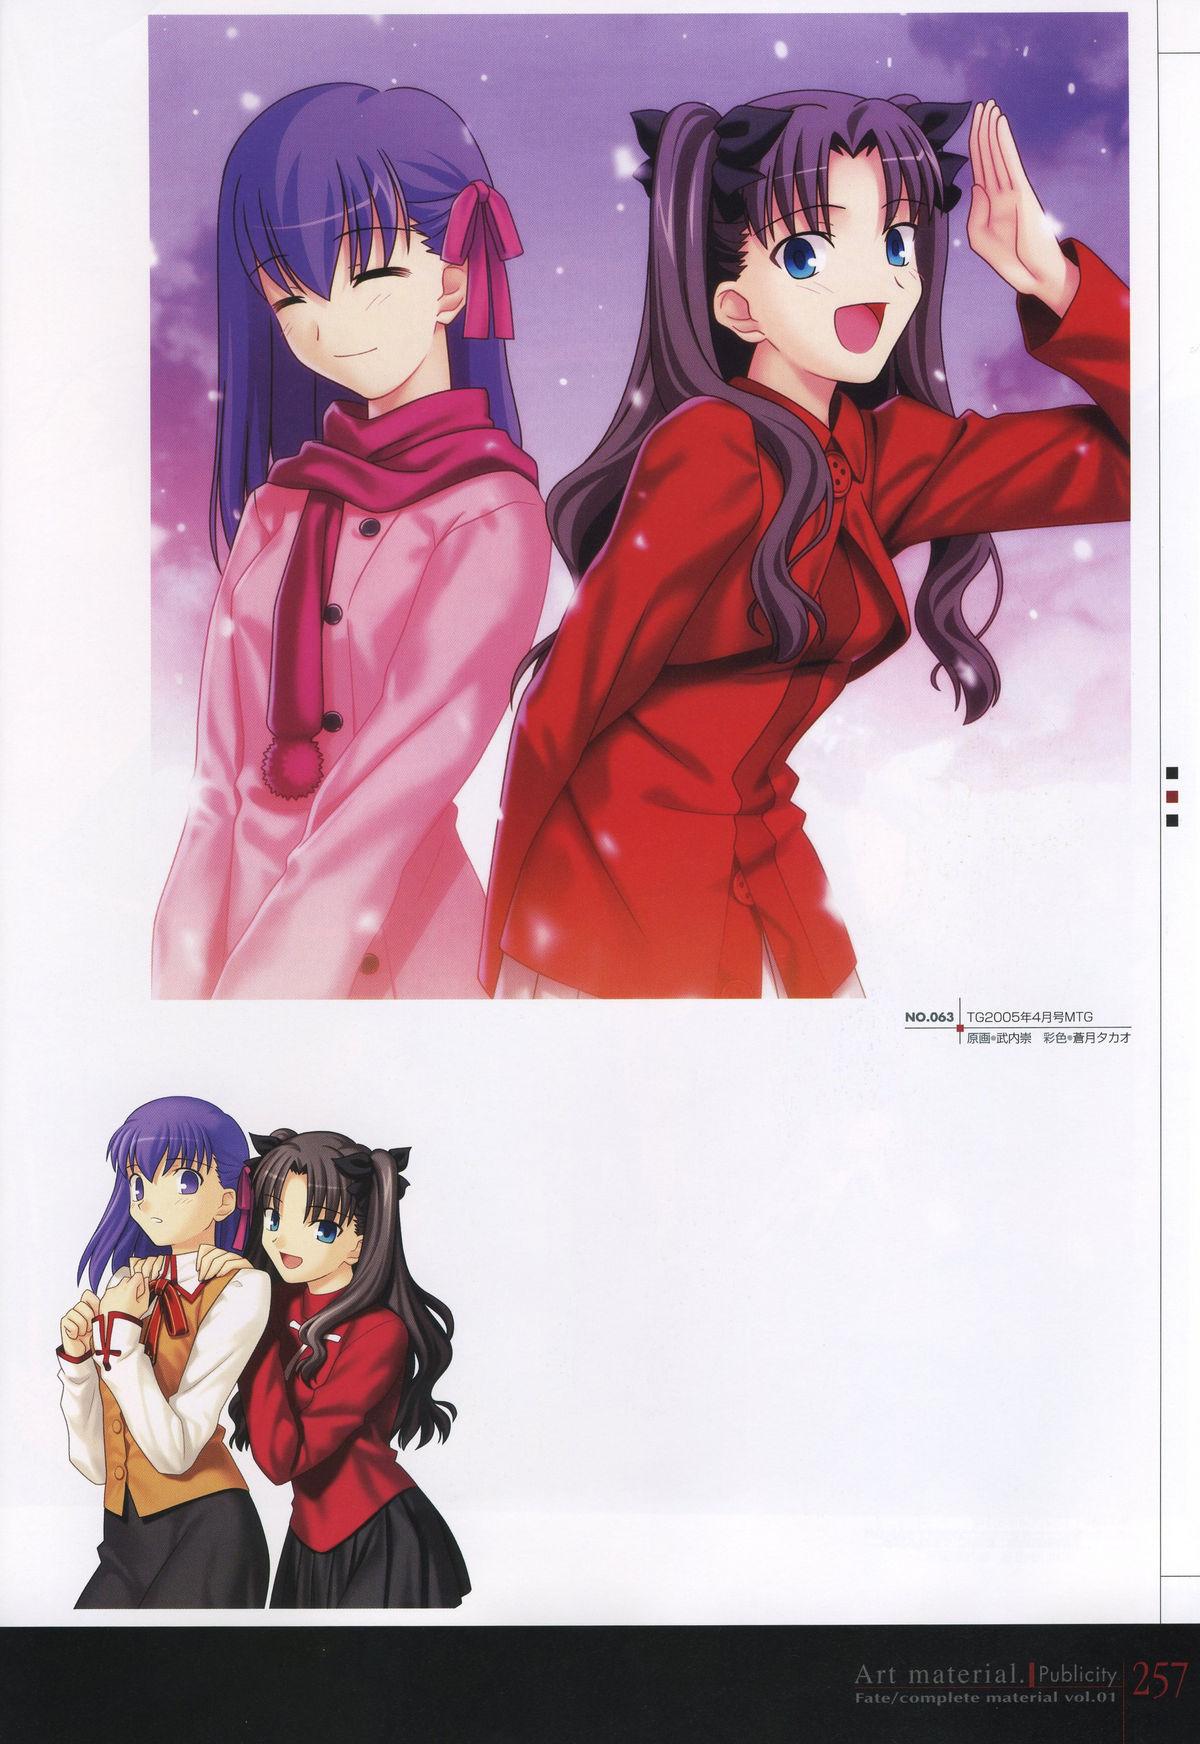 Fate/complete material I - Art material. 261